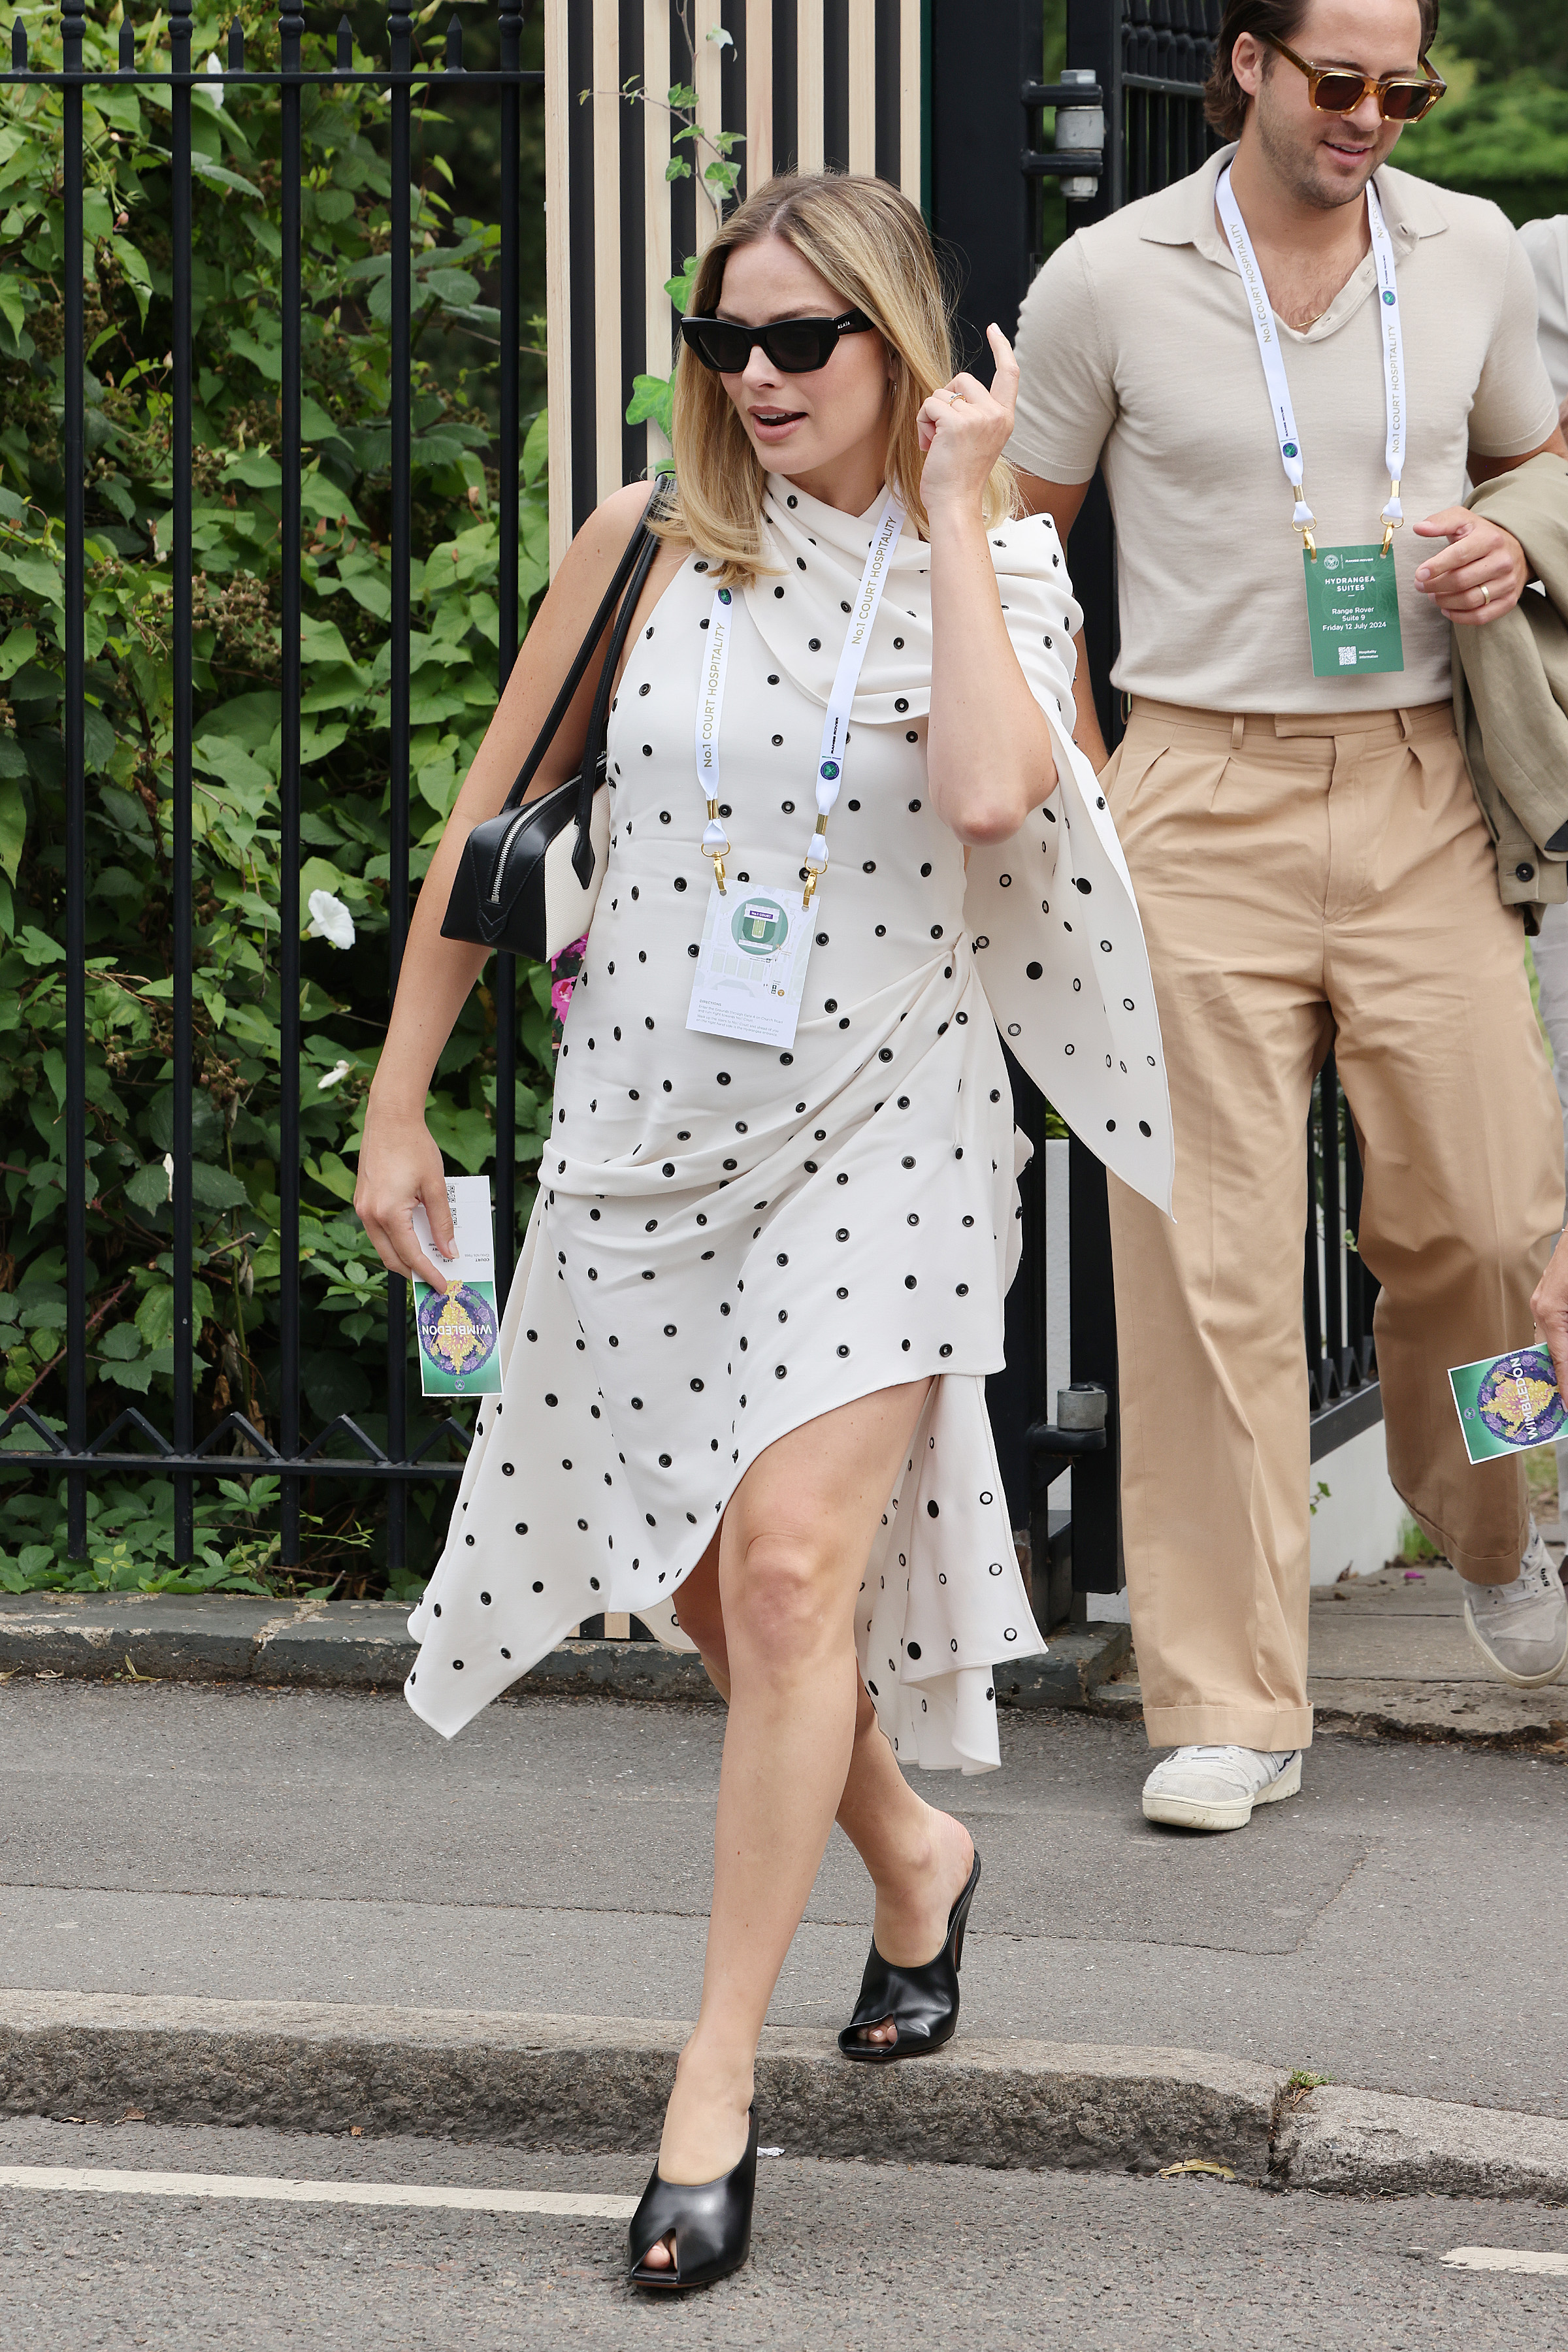 The Barbie star wore a chic black and white polka dot dress at Wimbledon